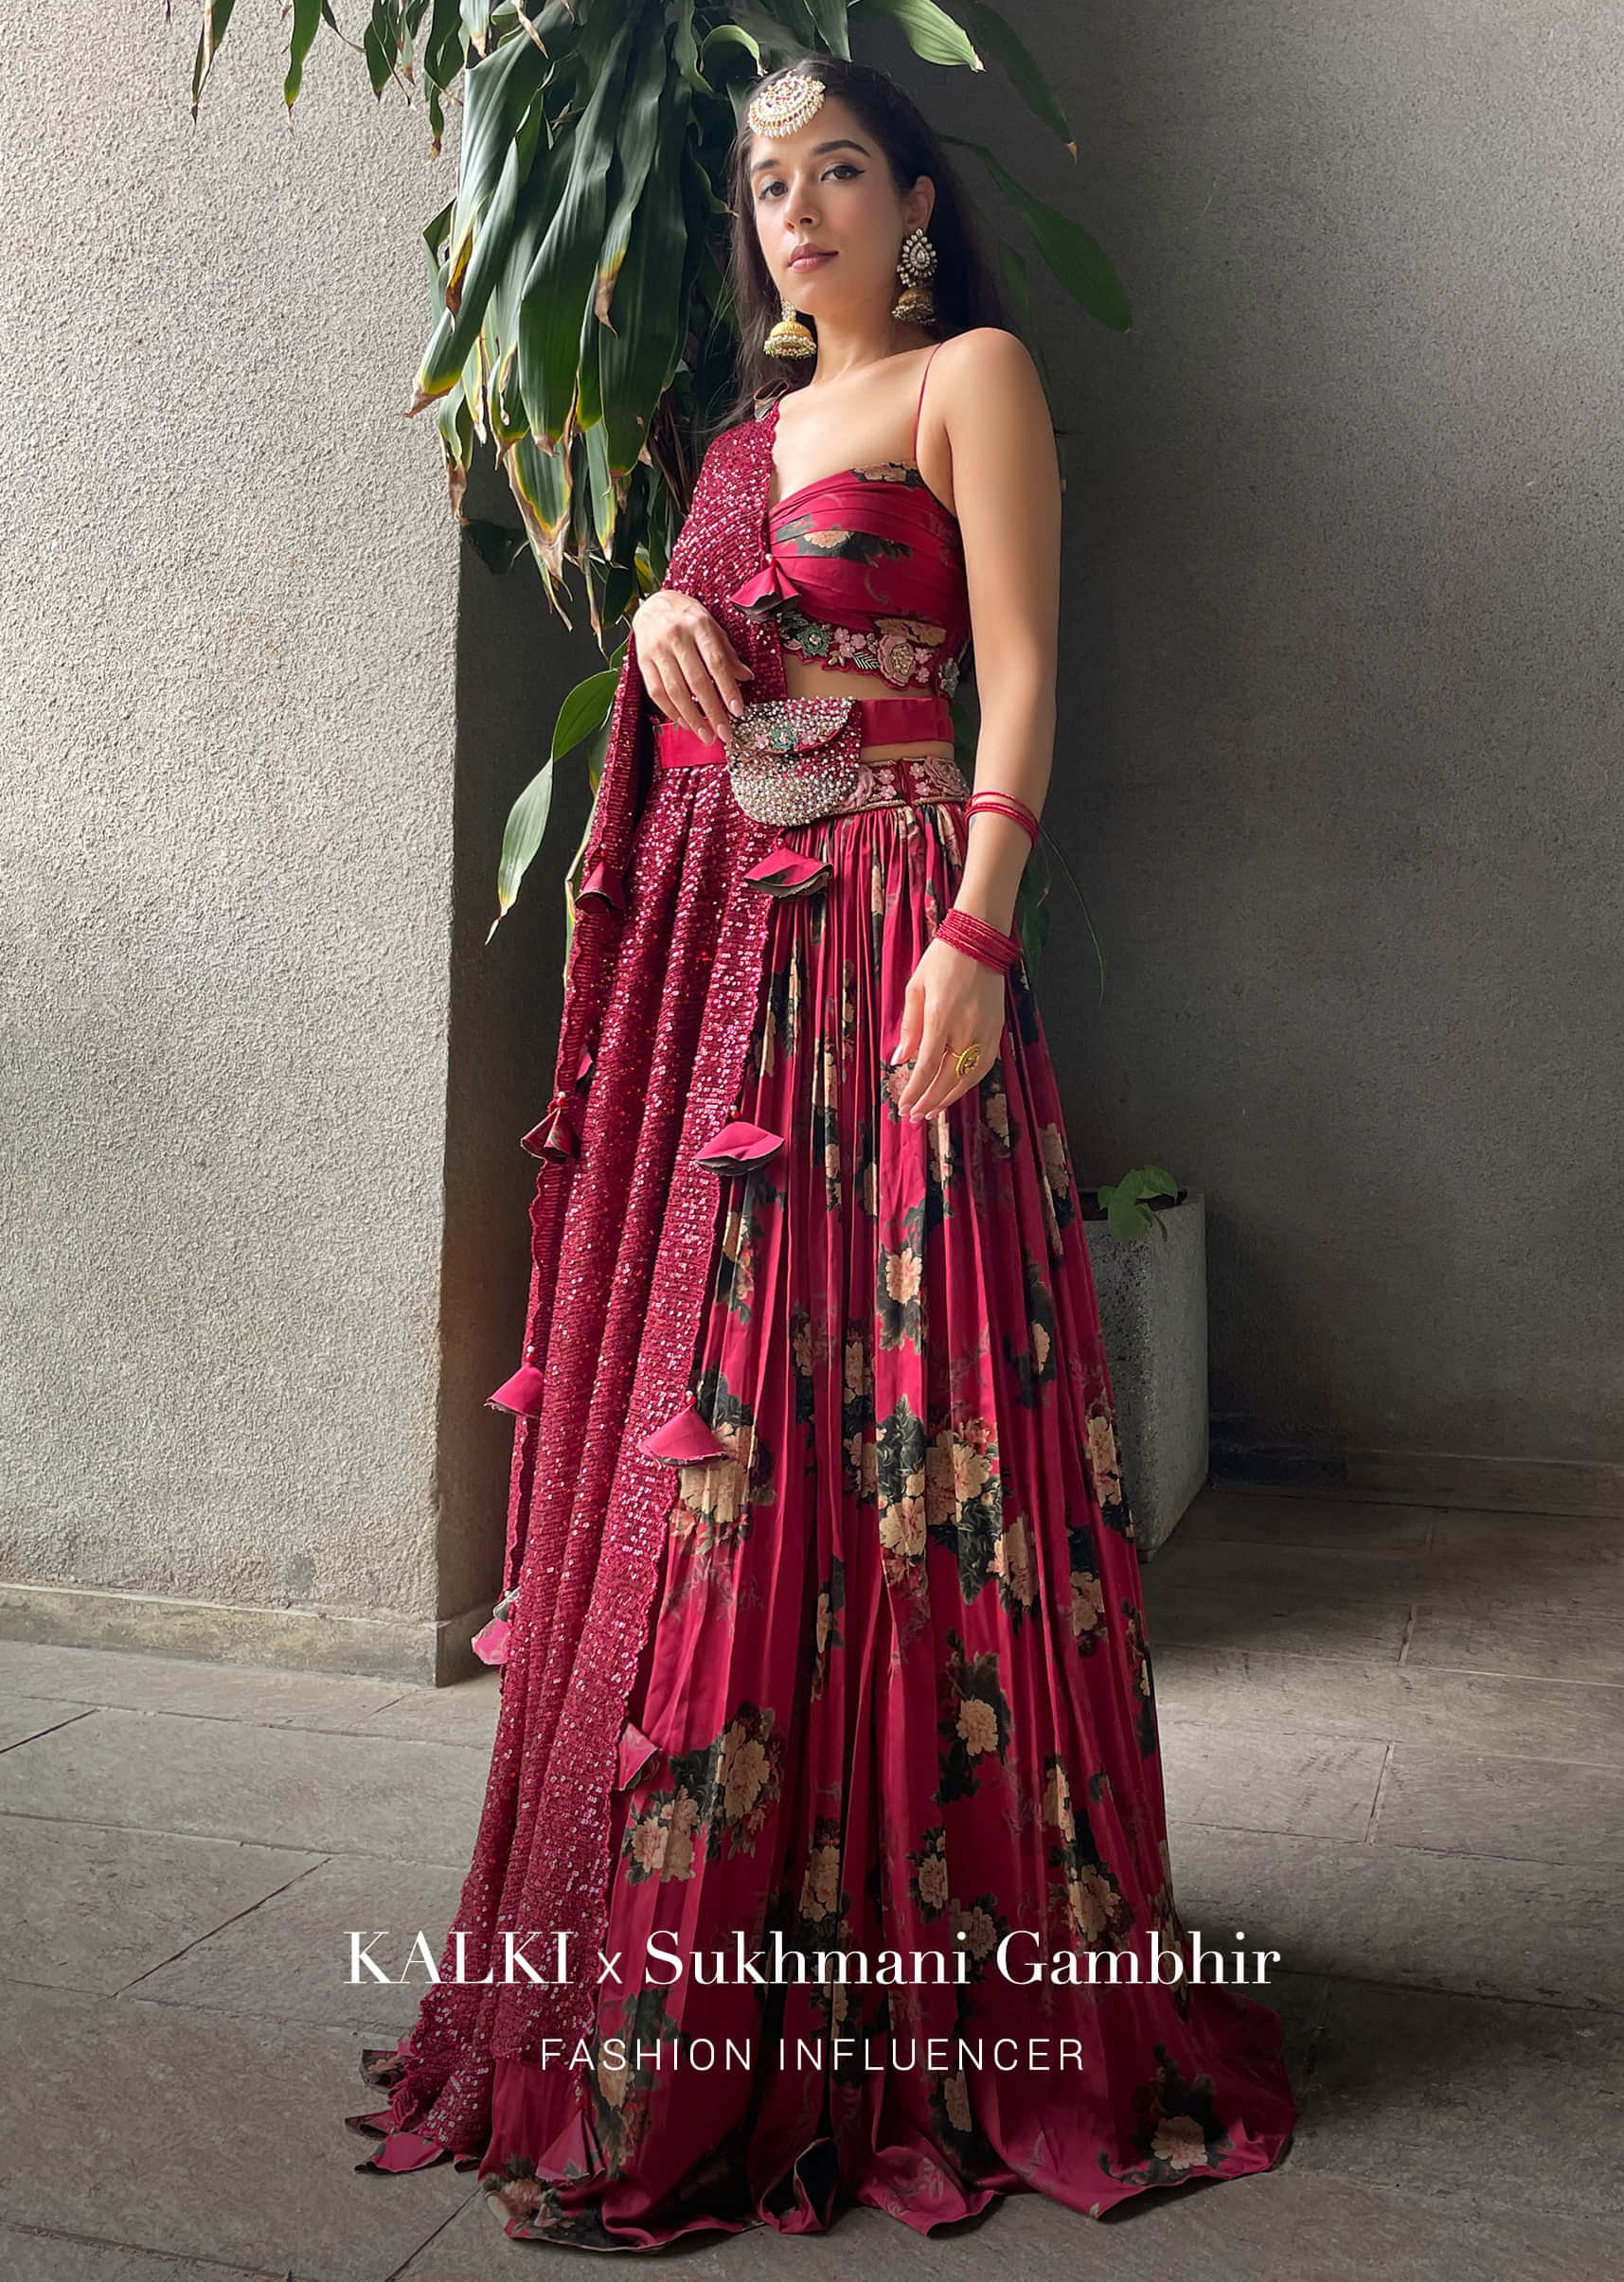 Cranberry Red Lehenga Choli In Floral Printed Satin With A Sequins Dupatta And Embroidered Belt Bag 